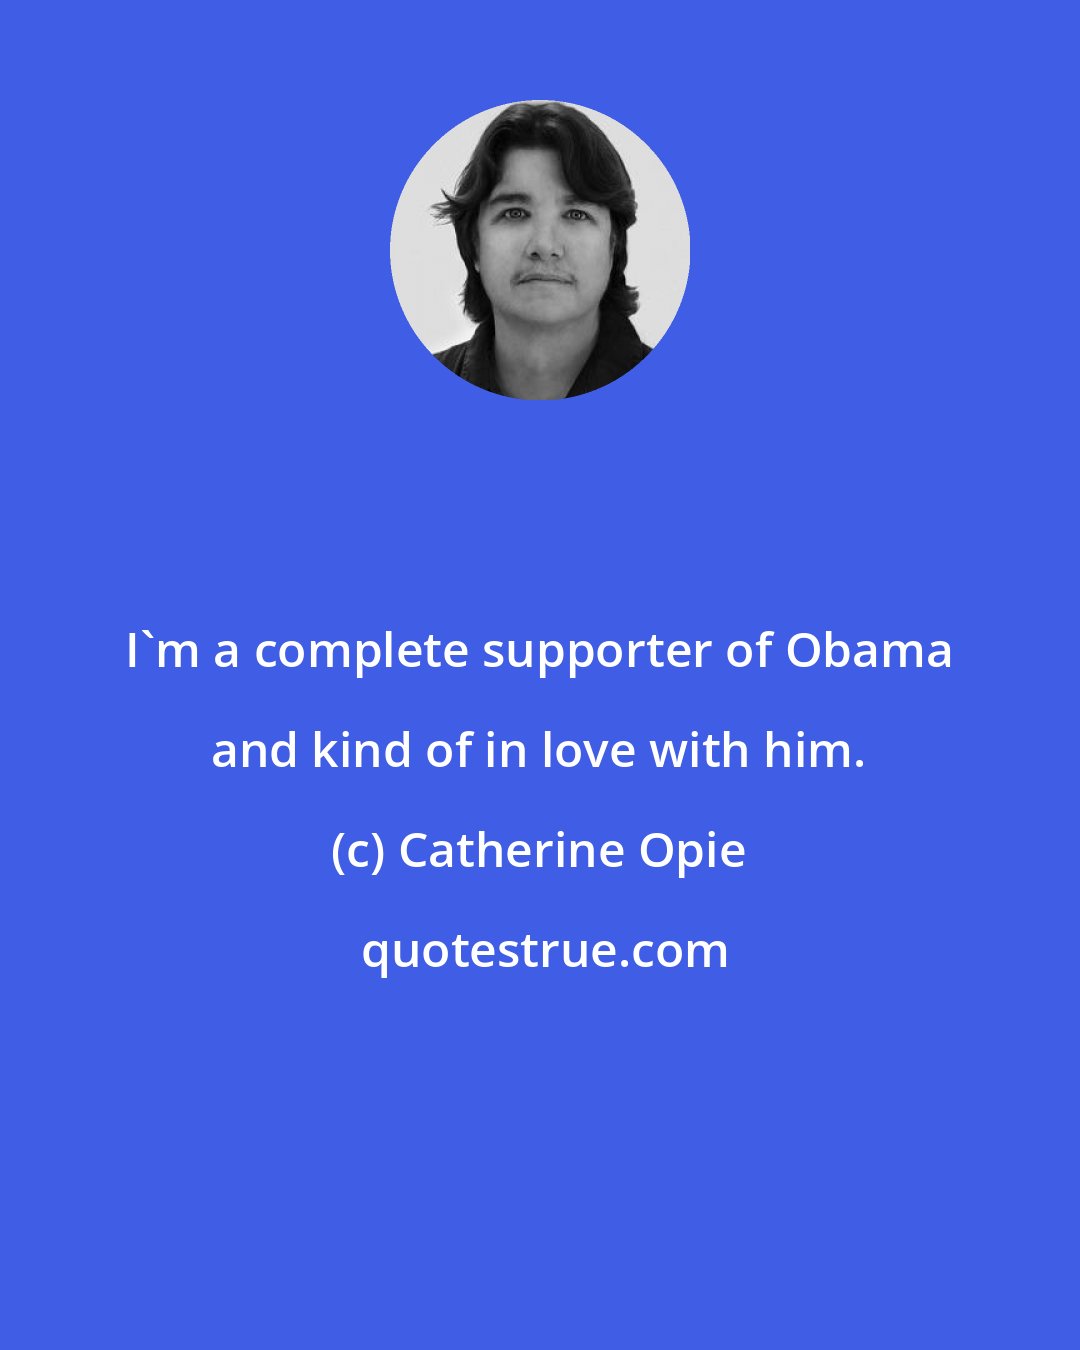 Catherine Opie: I'm a complete supporter of Obama and kind of in love with him.